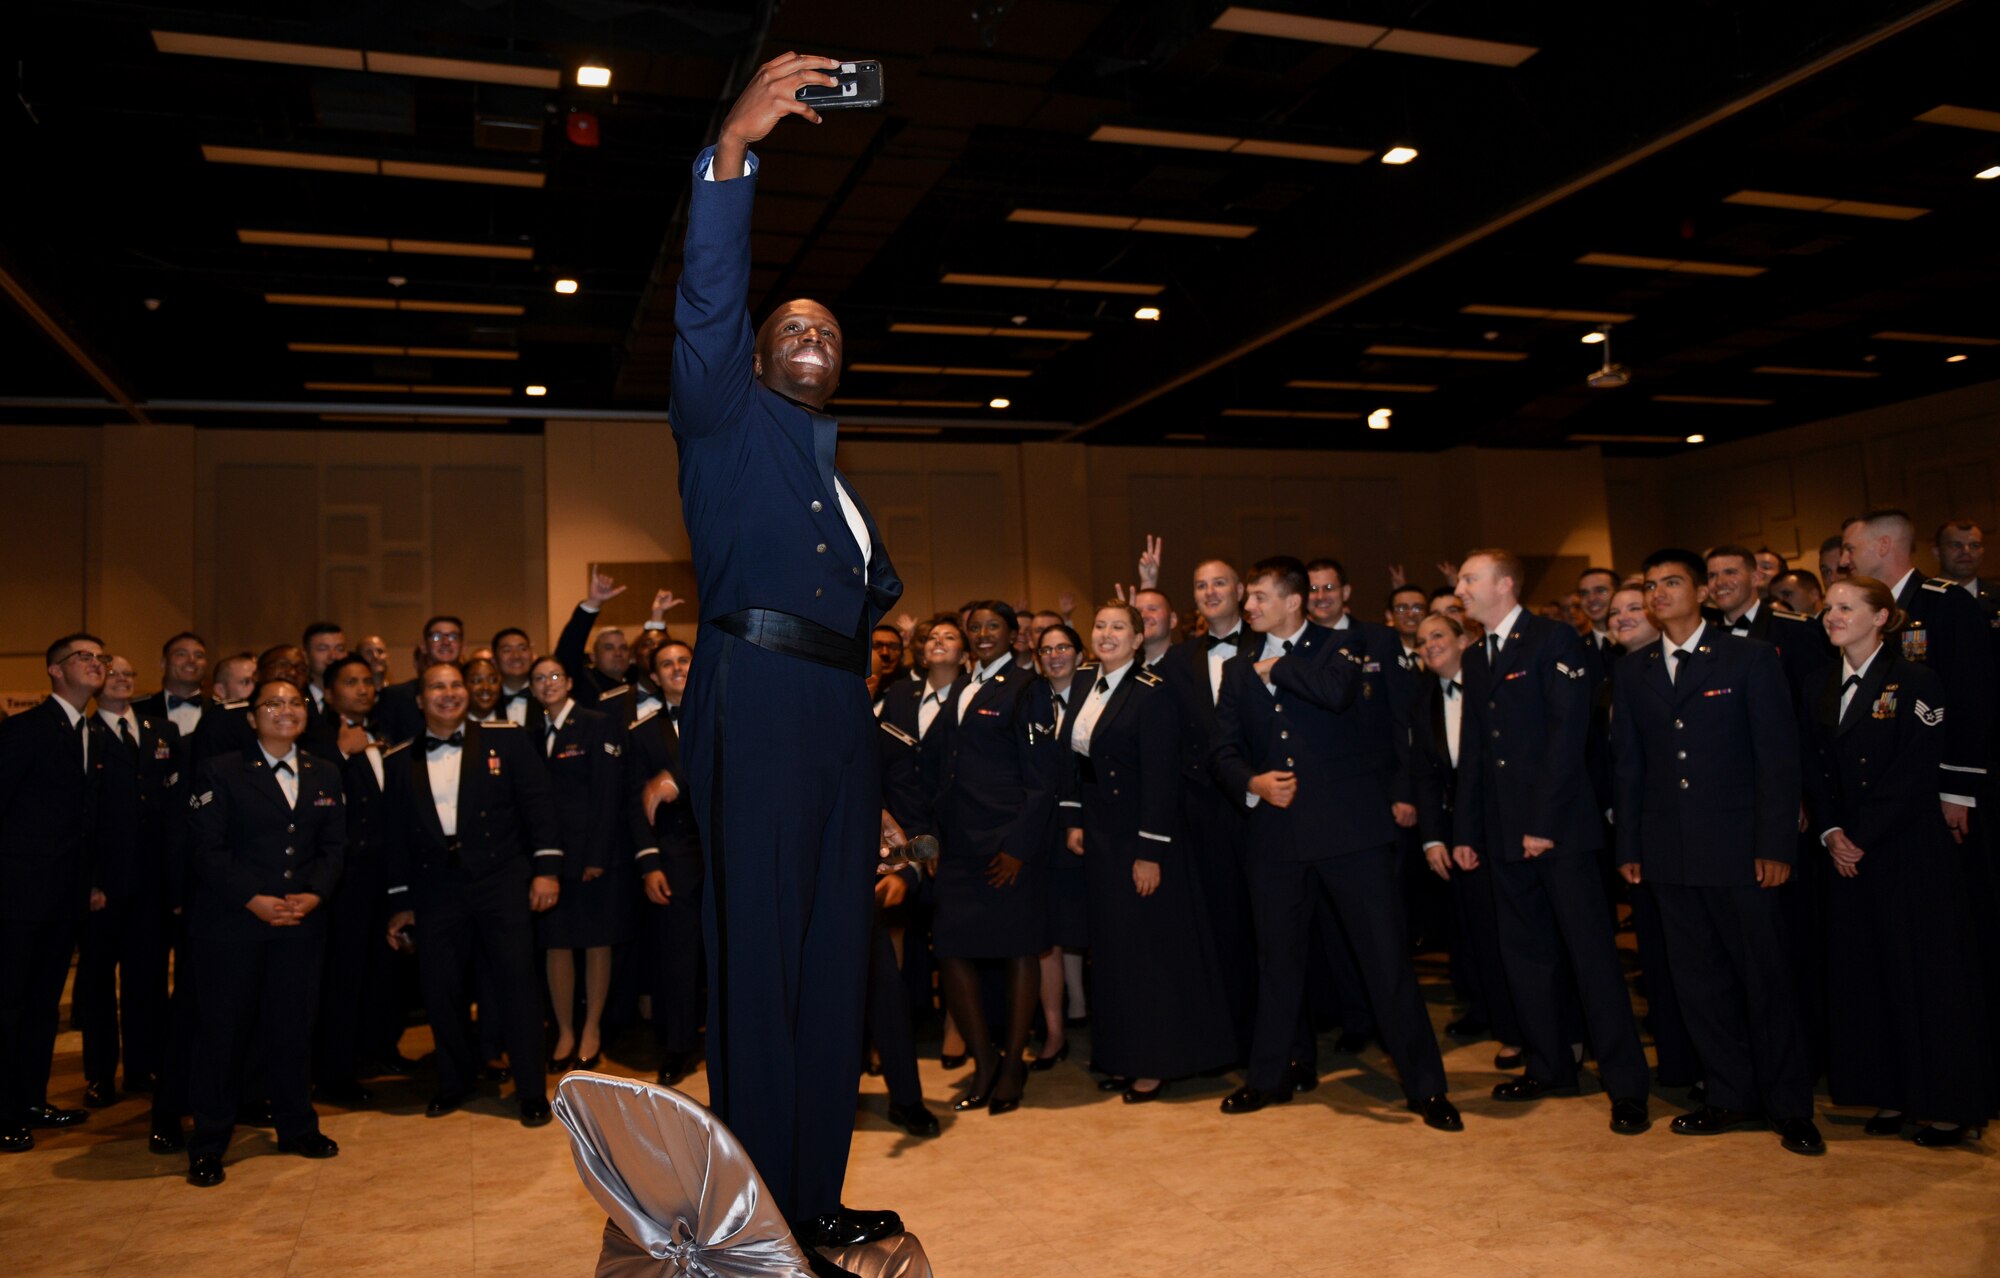 U.S. Air Force Chief Master Sgt. Lavor Kirkpatrick, 17th Training Wing command chief, takes a selfie with Goodfellow personnel at the 2019 Air Force Ball at the McNease Convention Center in San Angelo, Texas, September 7, 2019. The ball was a way to CONNECT with each other, as we GROW together and GO towards our future. (U.S. Air Force photo by Airman 1st Class Robyn Hunsinger/Released)